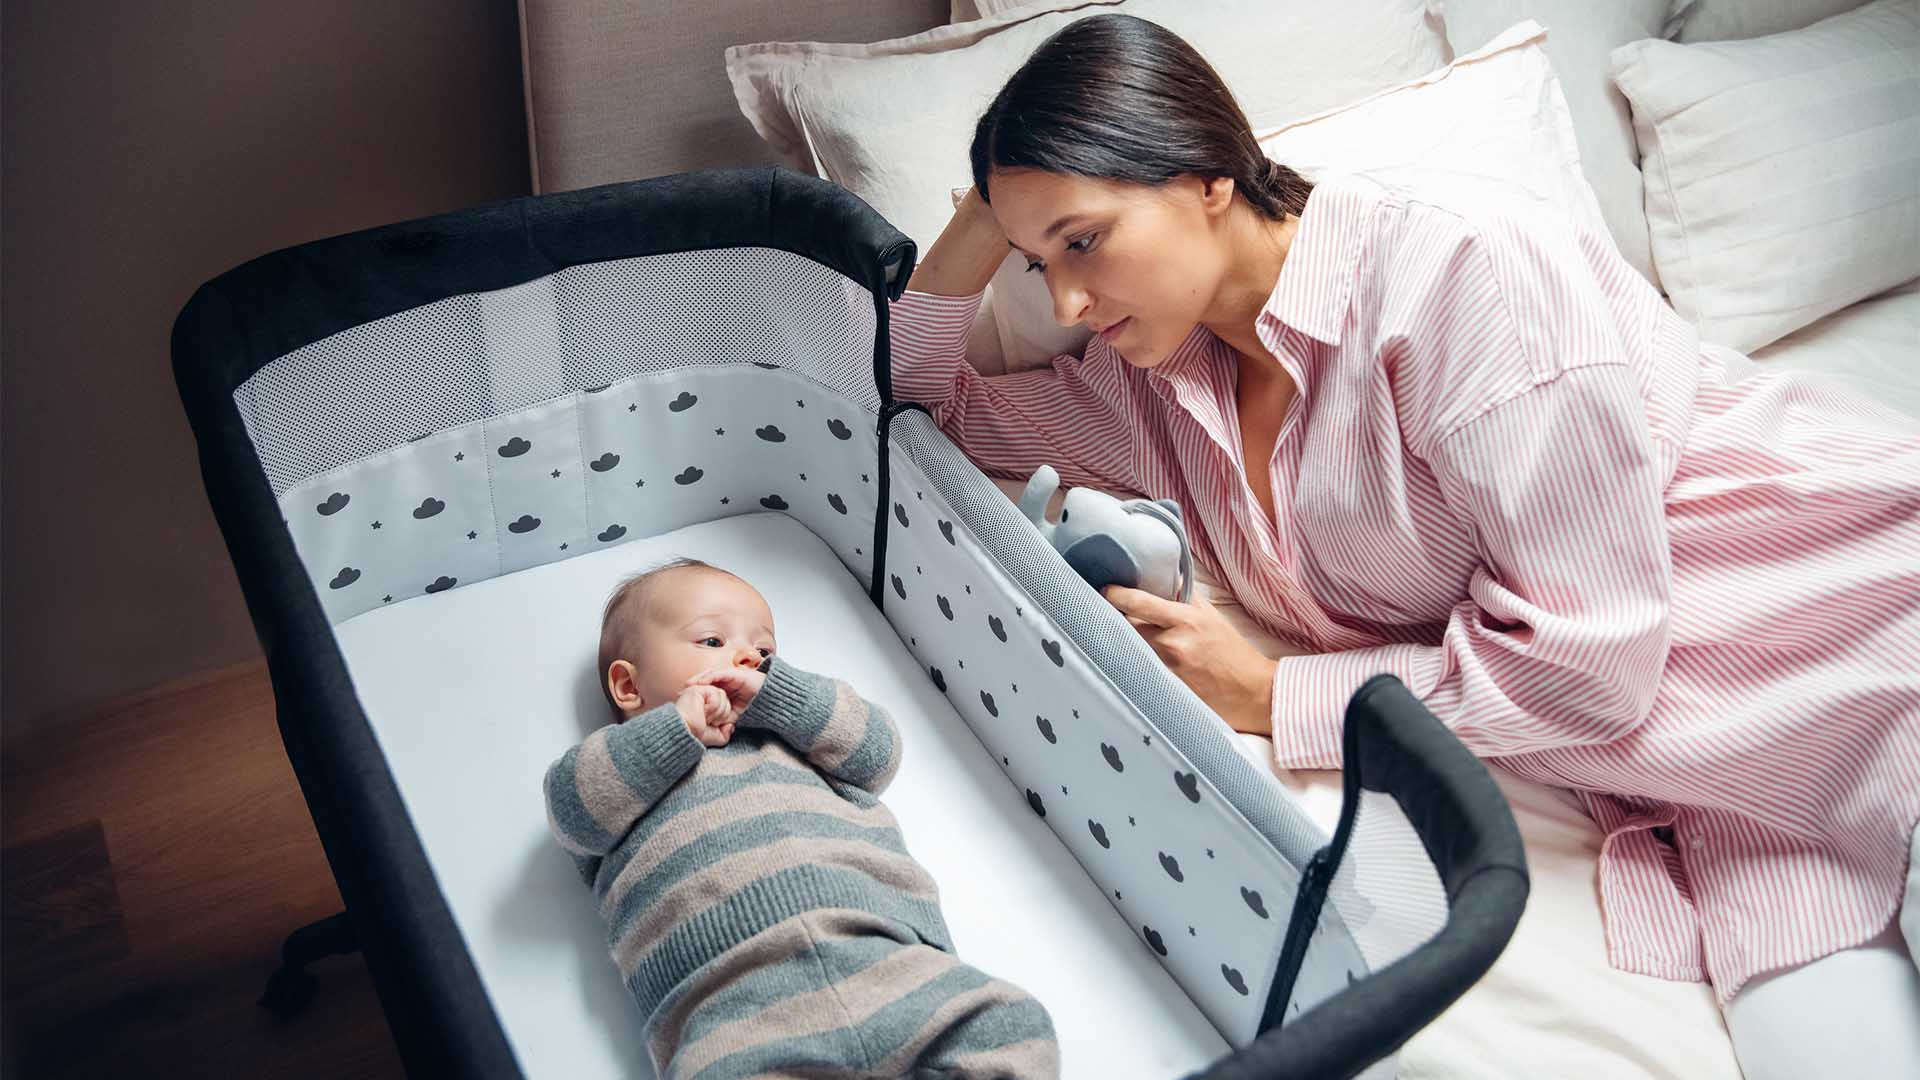 Cot protector - is it worth buying them?